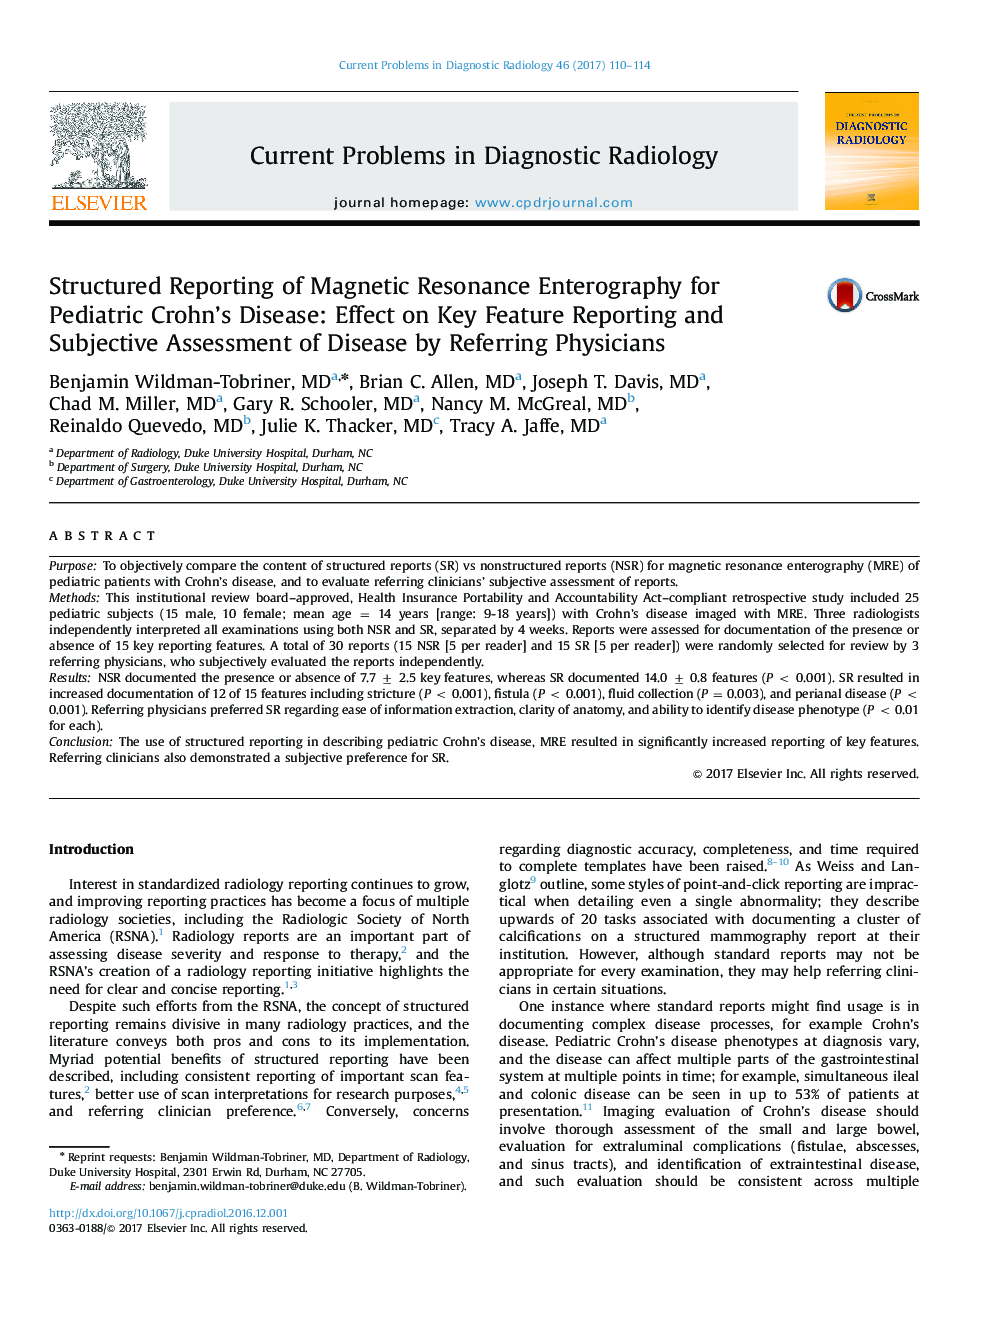 Structured Reporting of Magnetic Resonance Enterography for Pediatric Crohn's Disease: Effect on Key Feature Reporting and Subjective Assessment of Disease by Referring Physicians